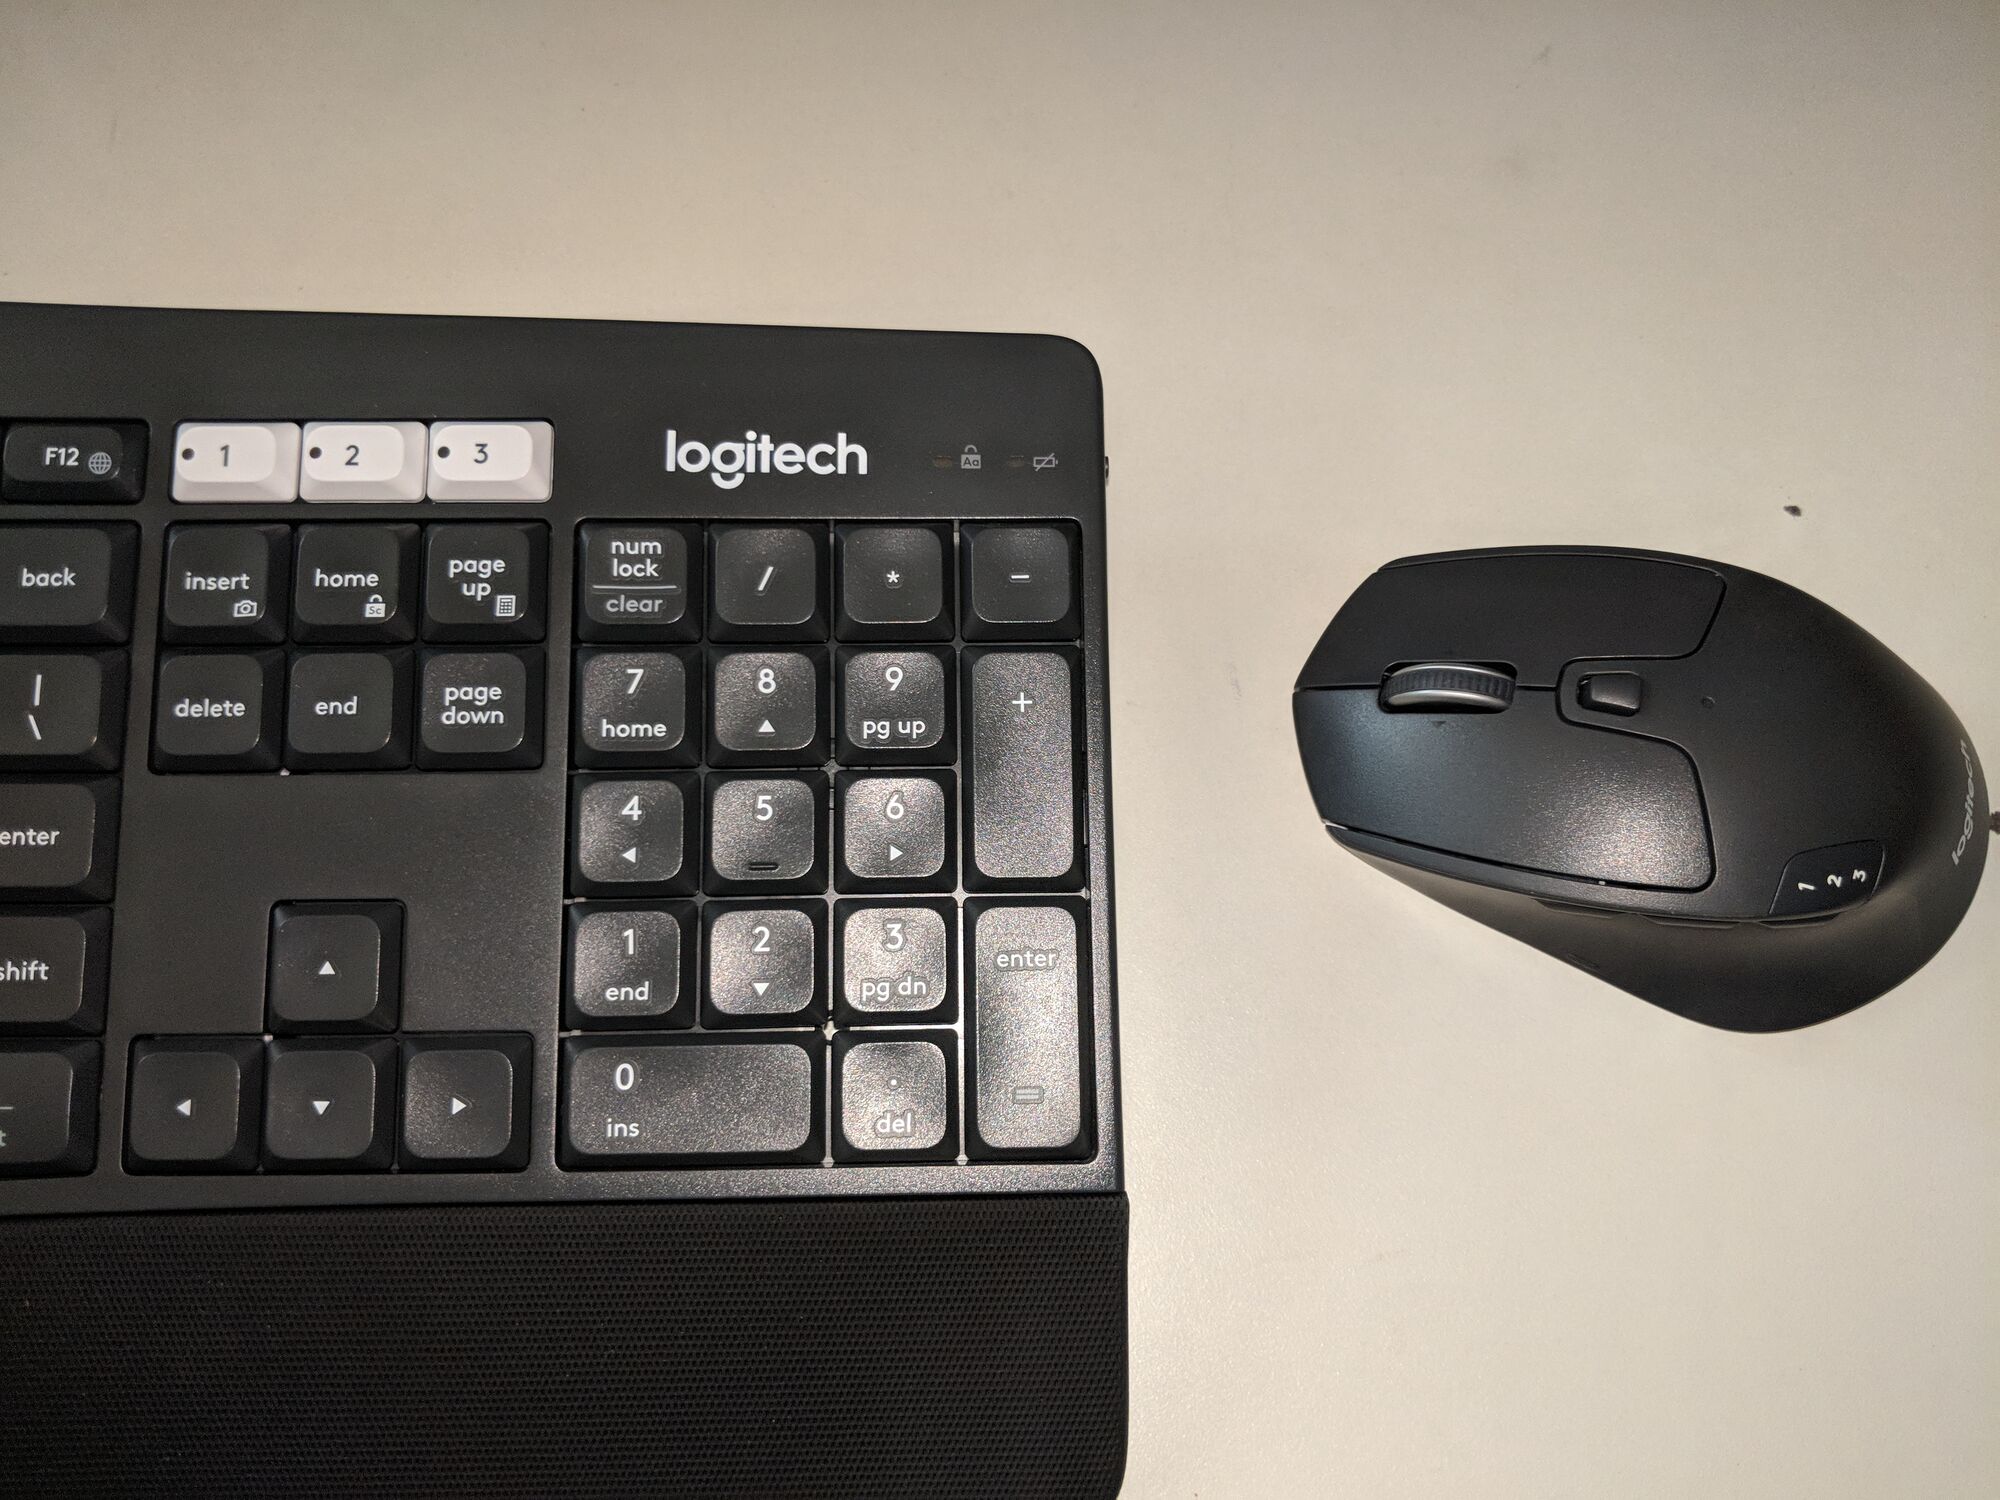 Notice the buttons labelled 1, 2, 3 in the keyboard and mouse (the buttons are in the side)